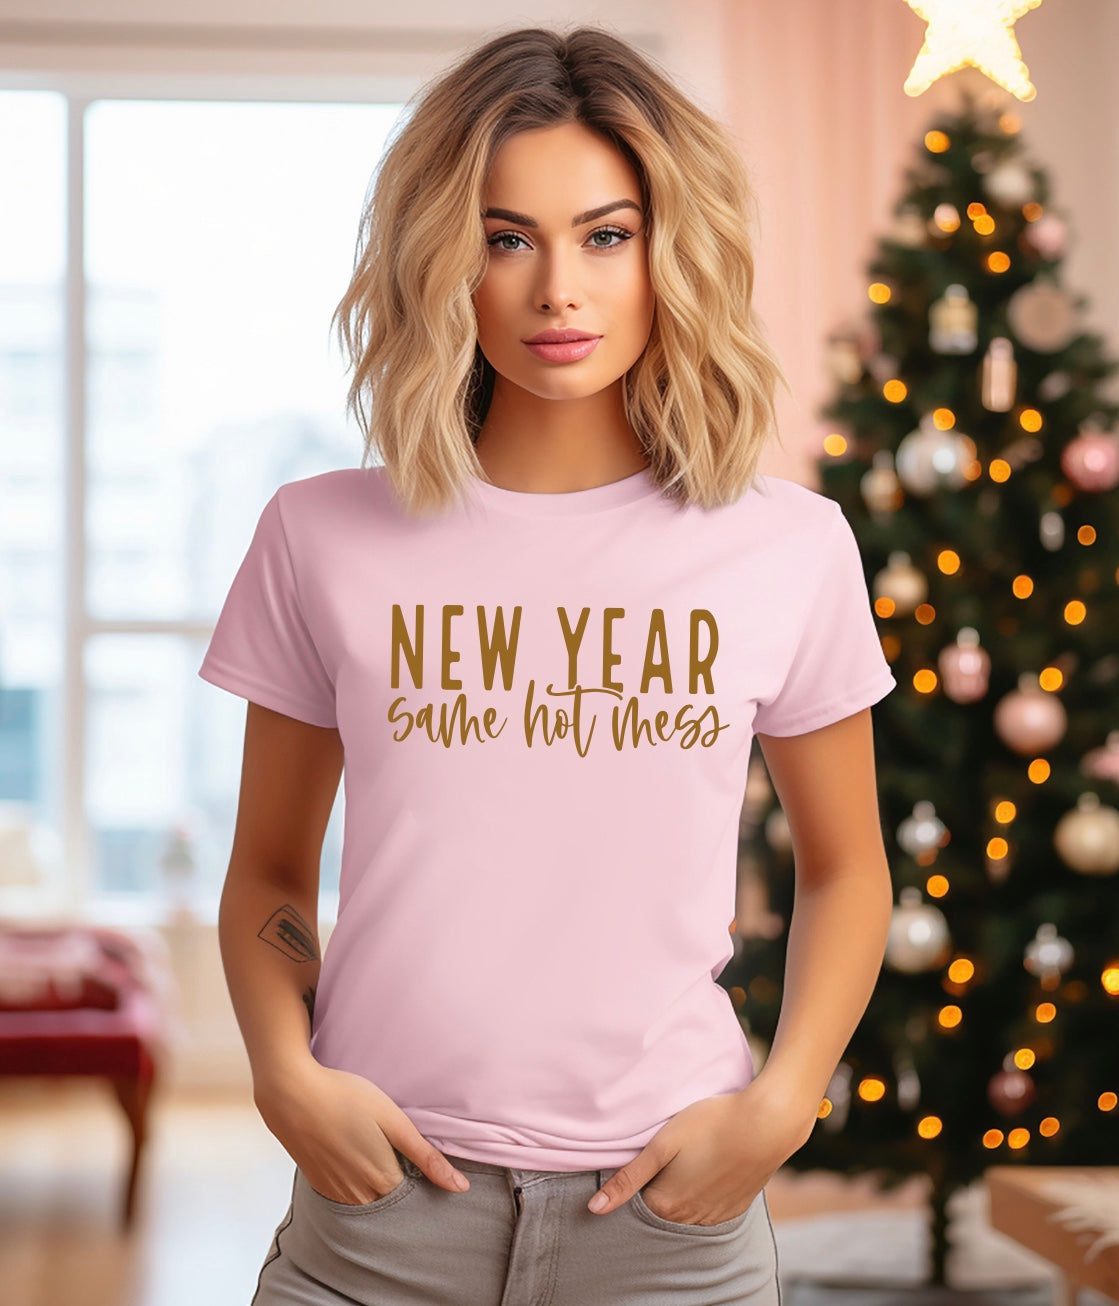 new year same hot mess unisex t-shirt in pink with gold graphic